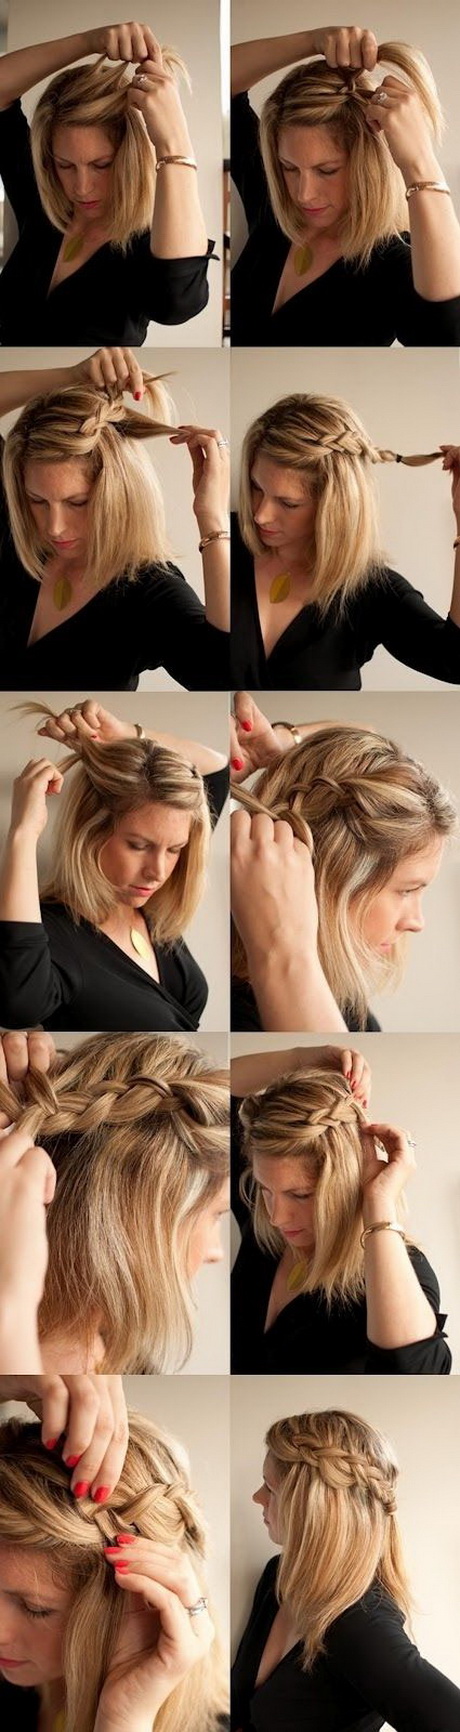 Different easy hairstyles for long hair different-easy-hairstyles-for-long-hair-02_12